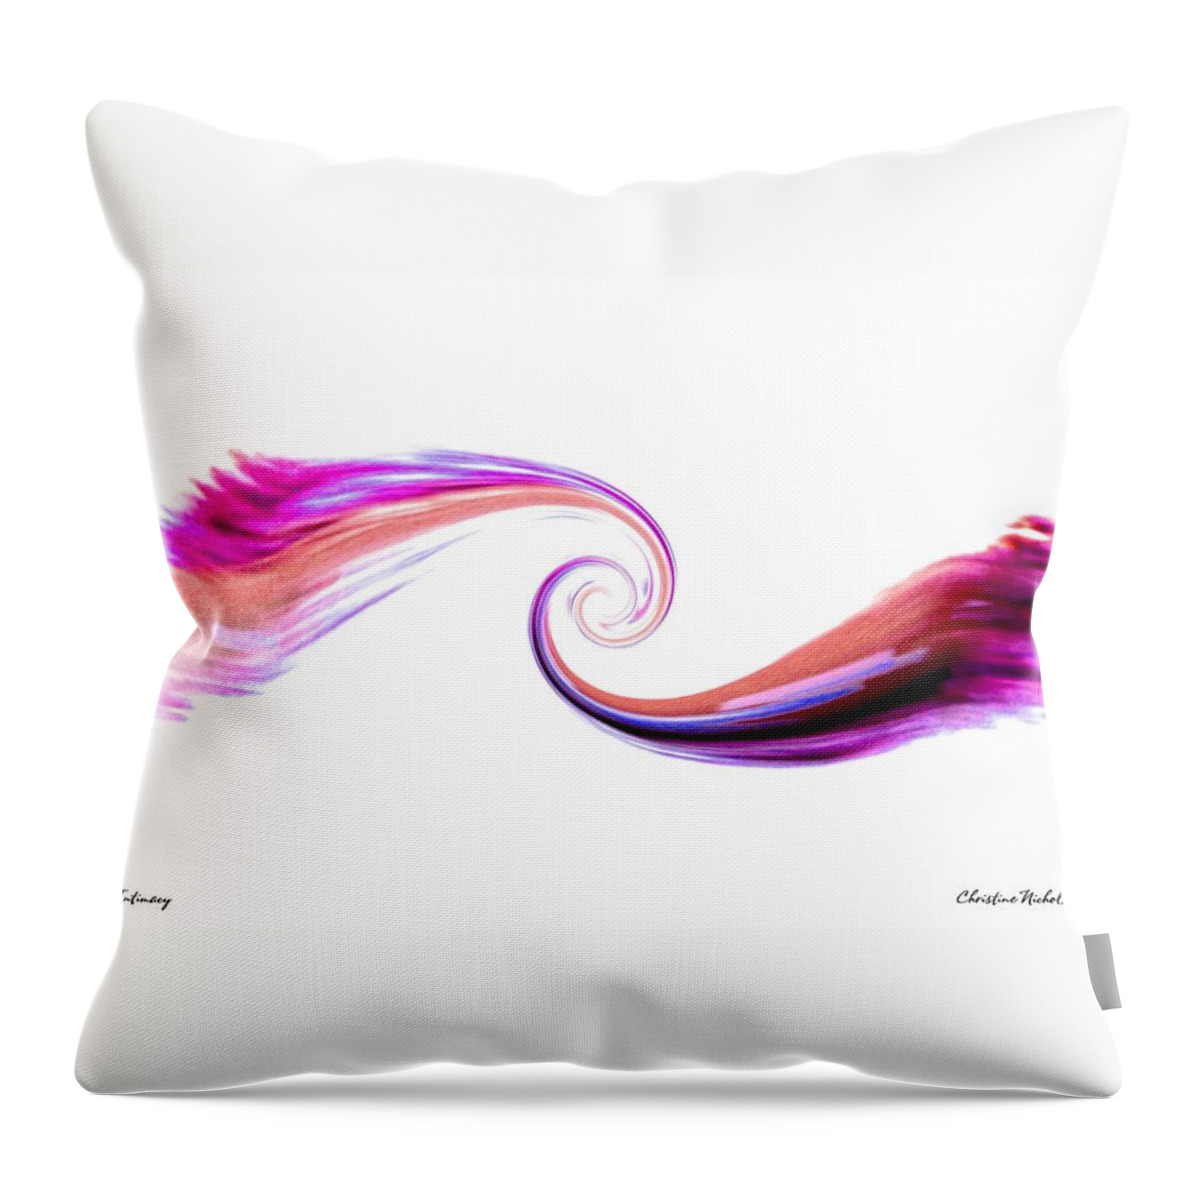 Intimacy Throw Pillow featuring the digital art Intimacy by Christine Nichols